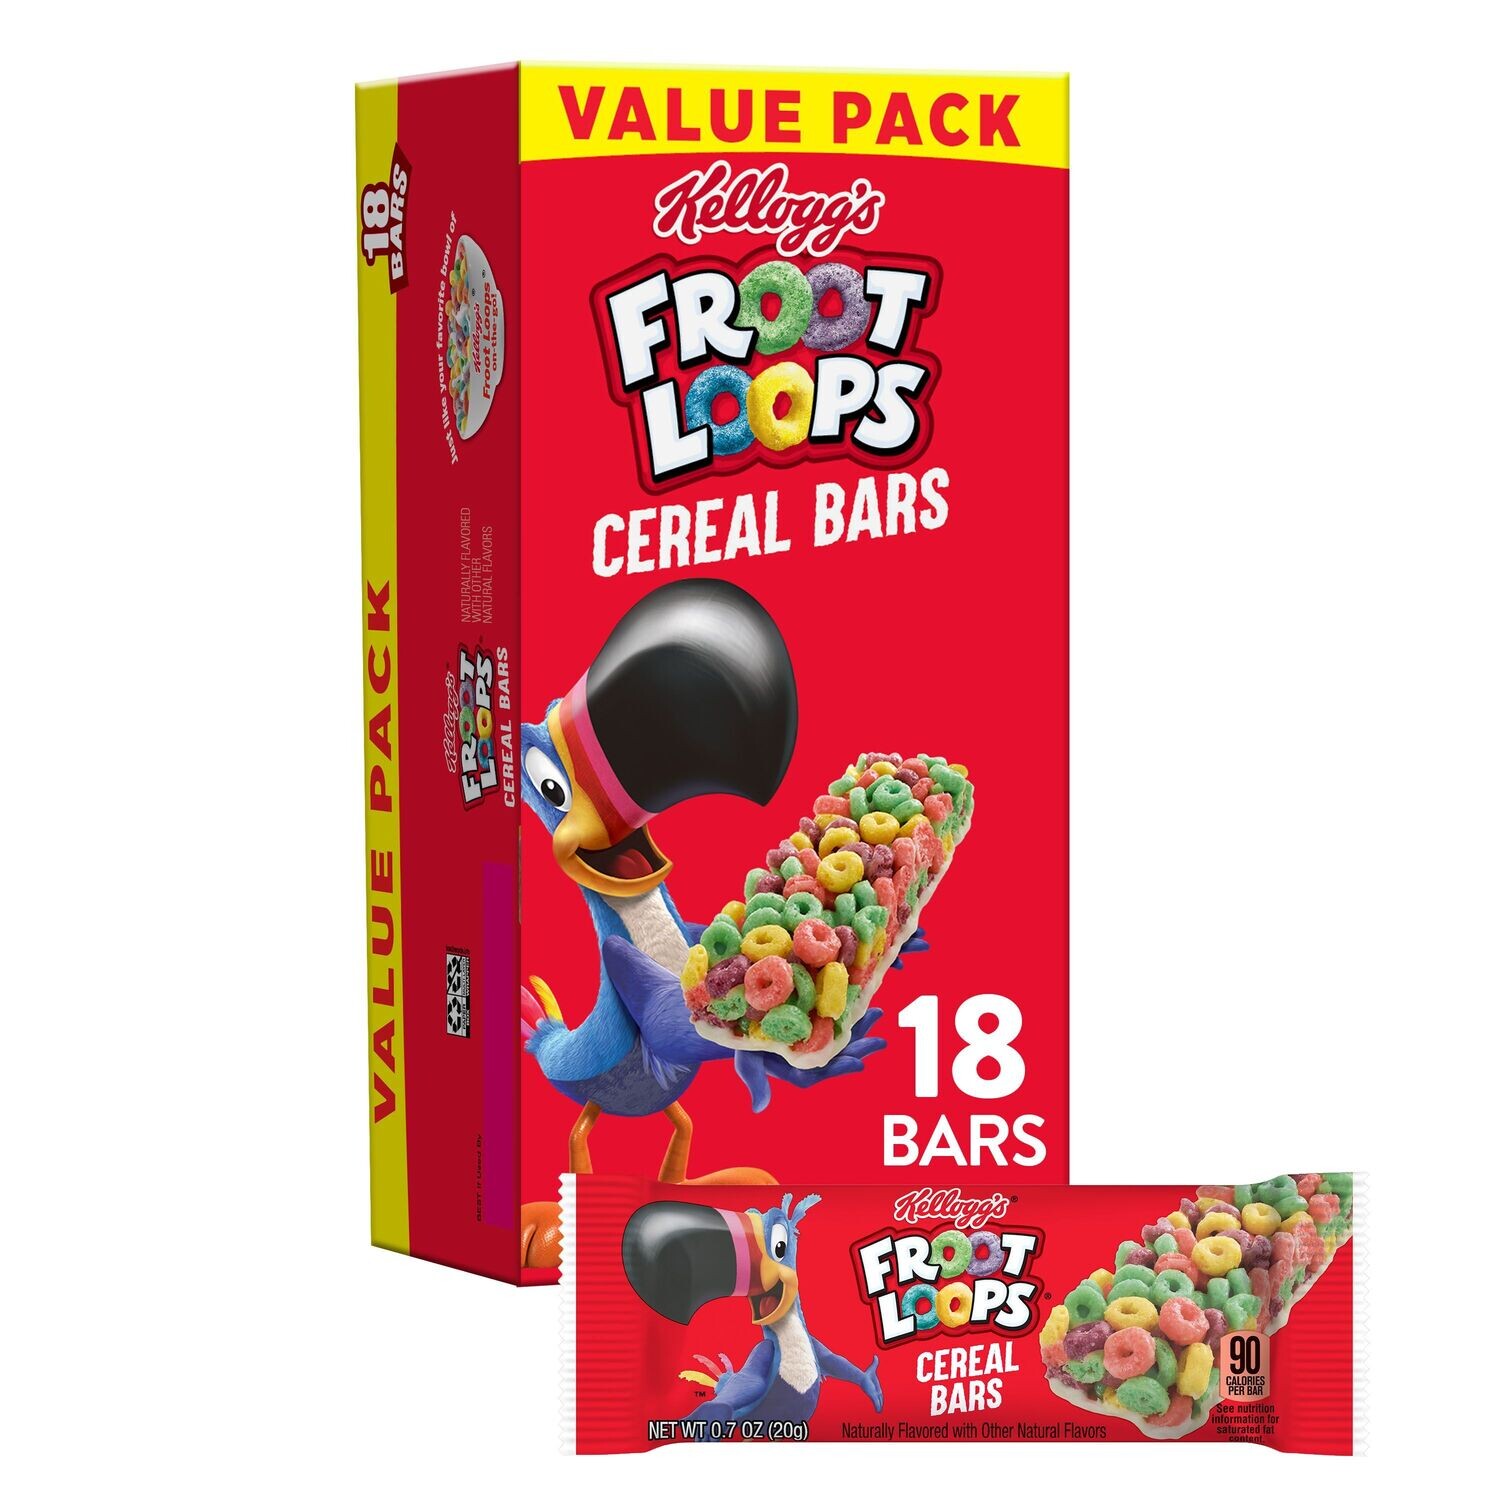 Soft Baked Bars - Froot Loops 18ct